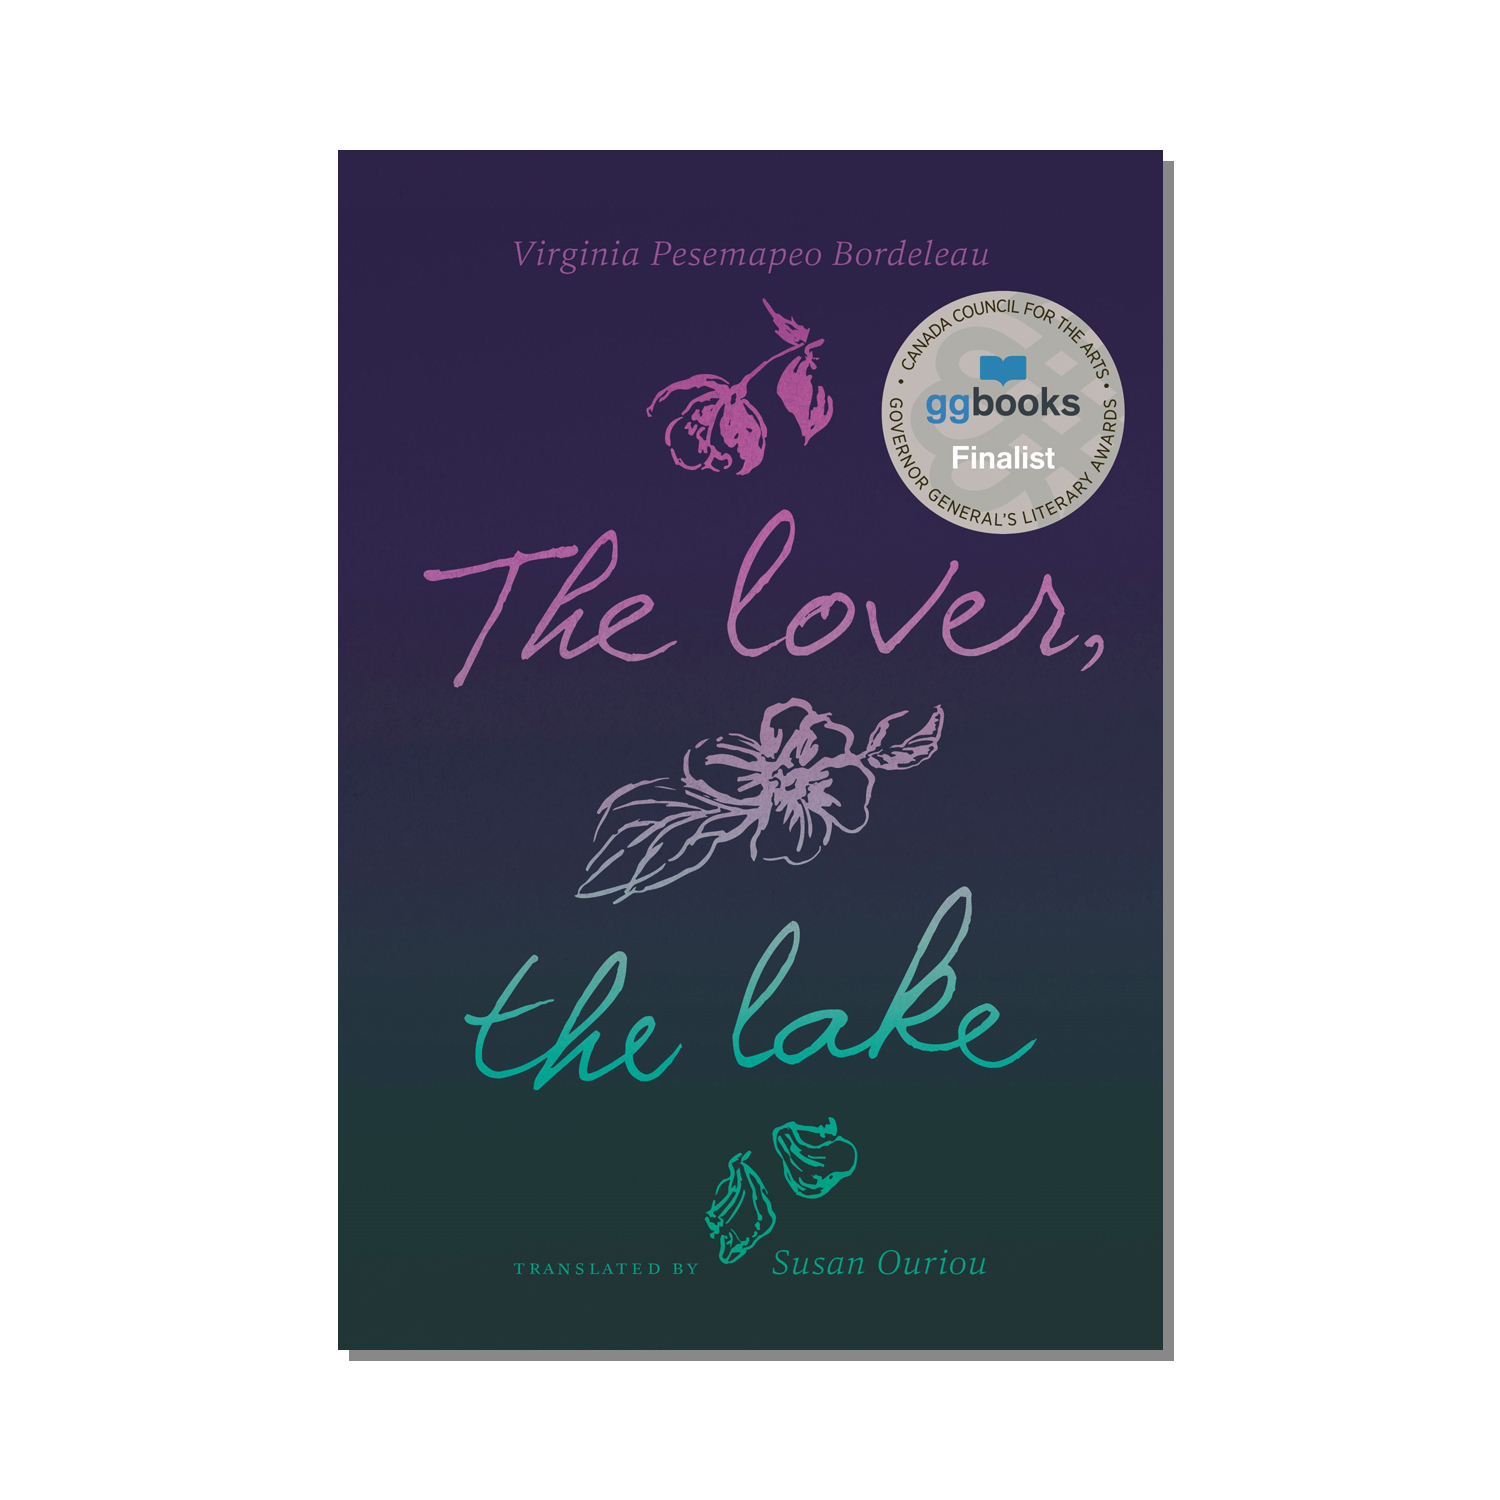 Book cover for The Lover, the Lake by Virginia Pesemapeo Bordeleau